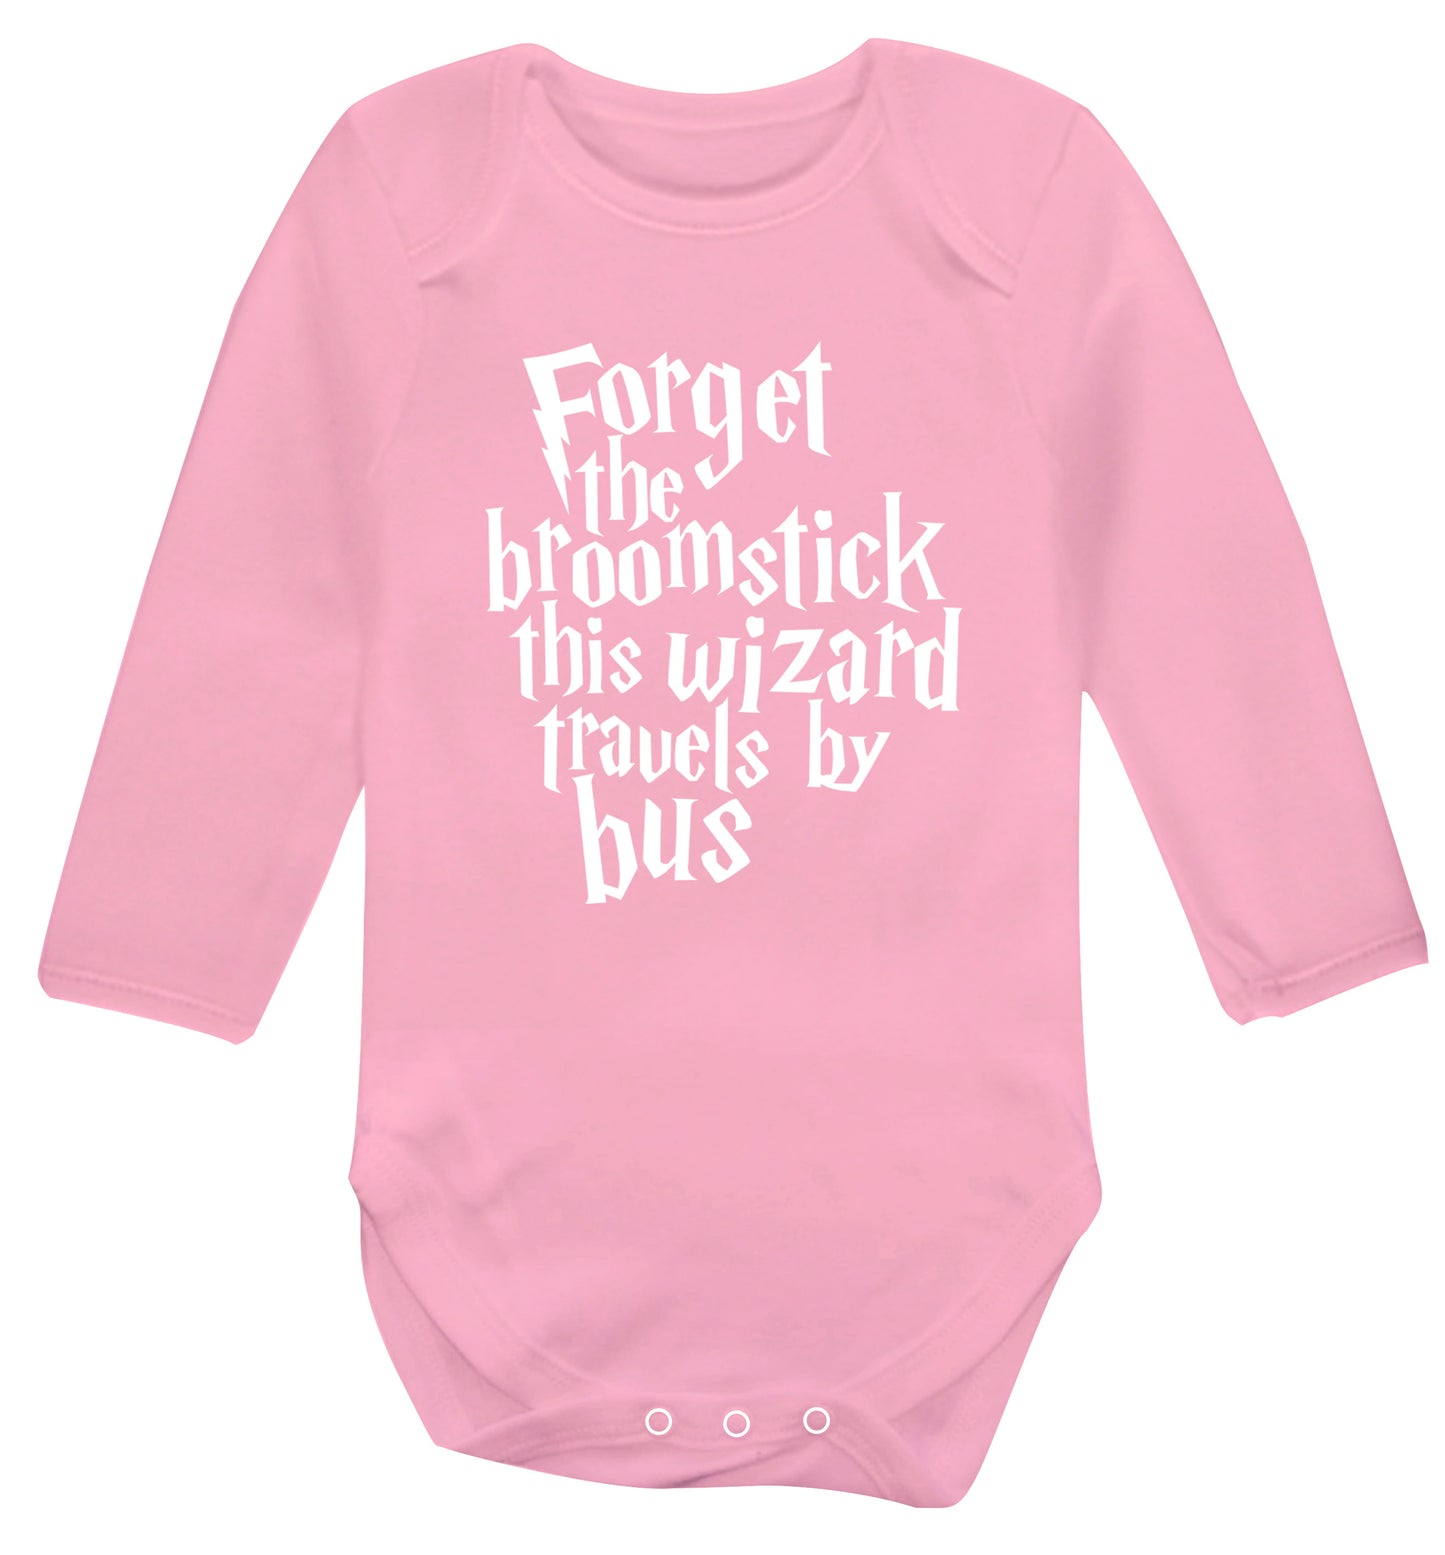 Forget the broomstick this wizard travels by bus Baby Vest long sleeved pale pink 6-12 months